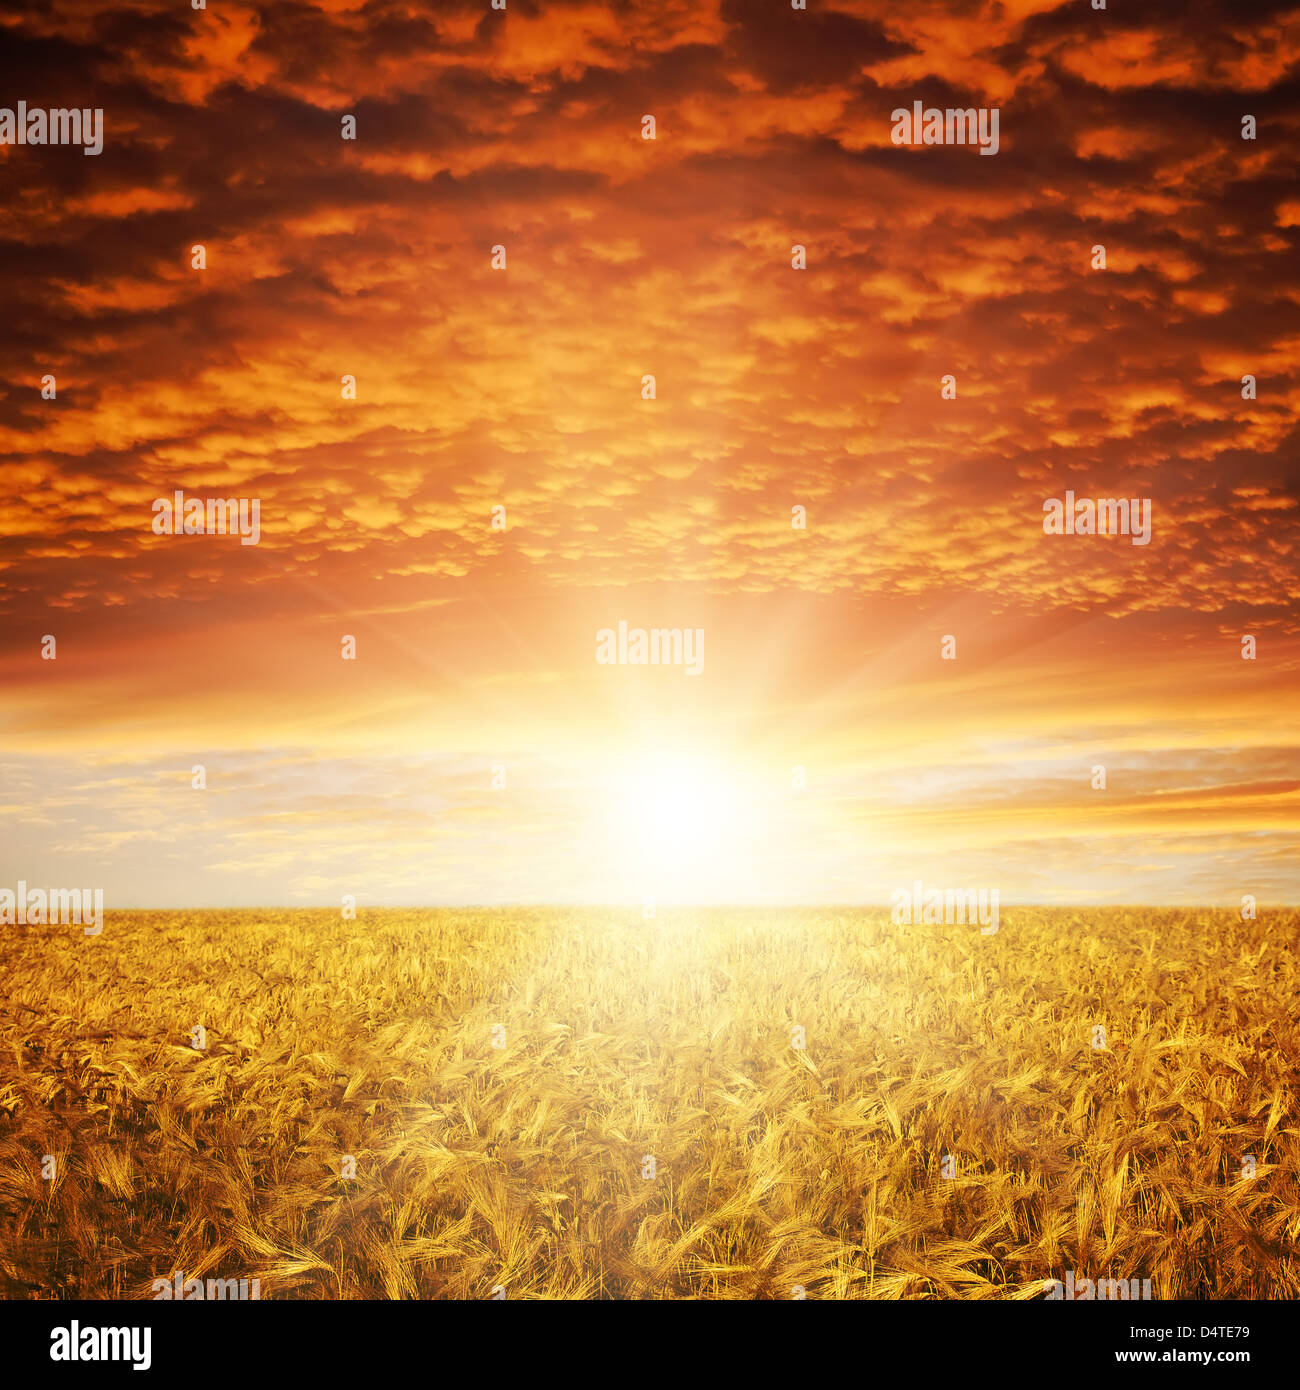 Golden sunset over wheat field Banque D'Images